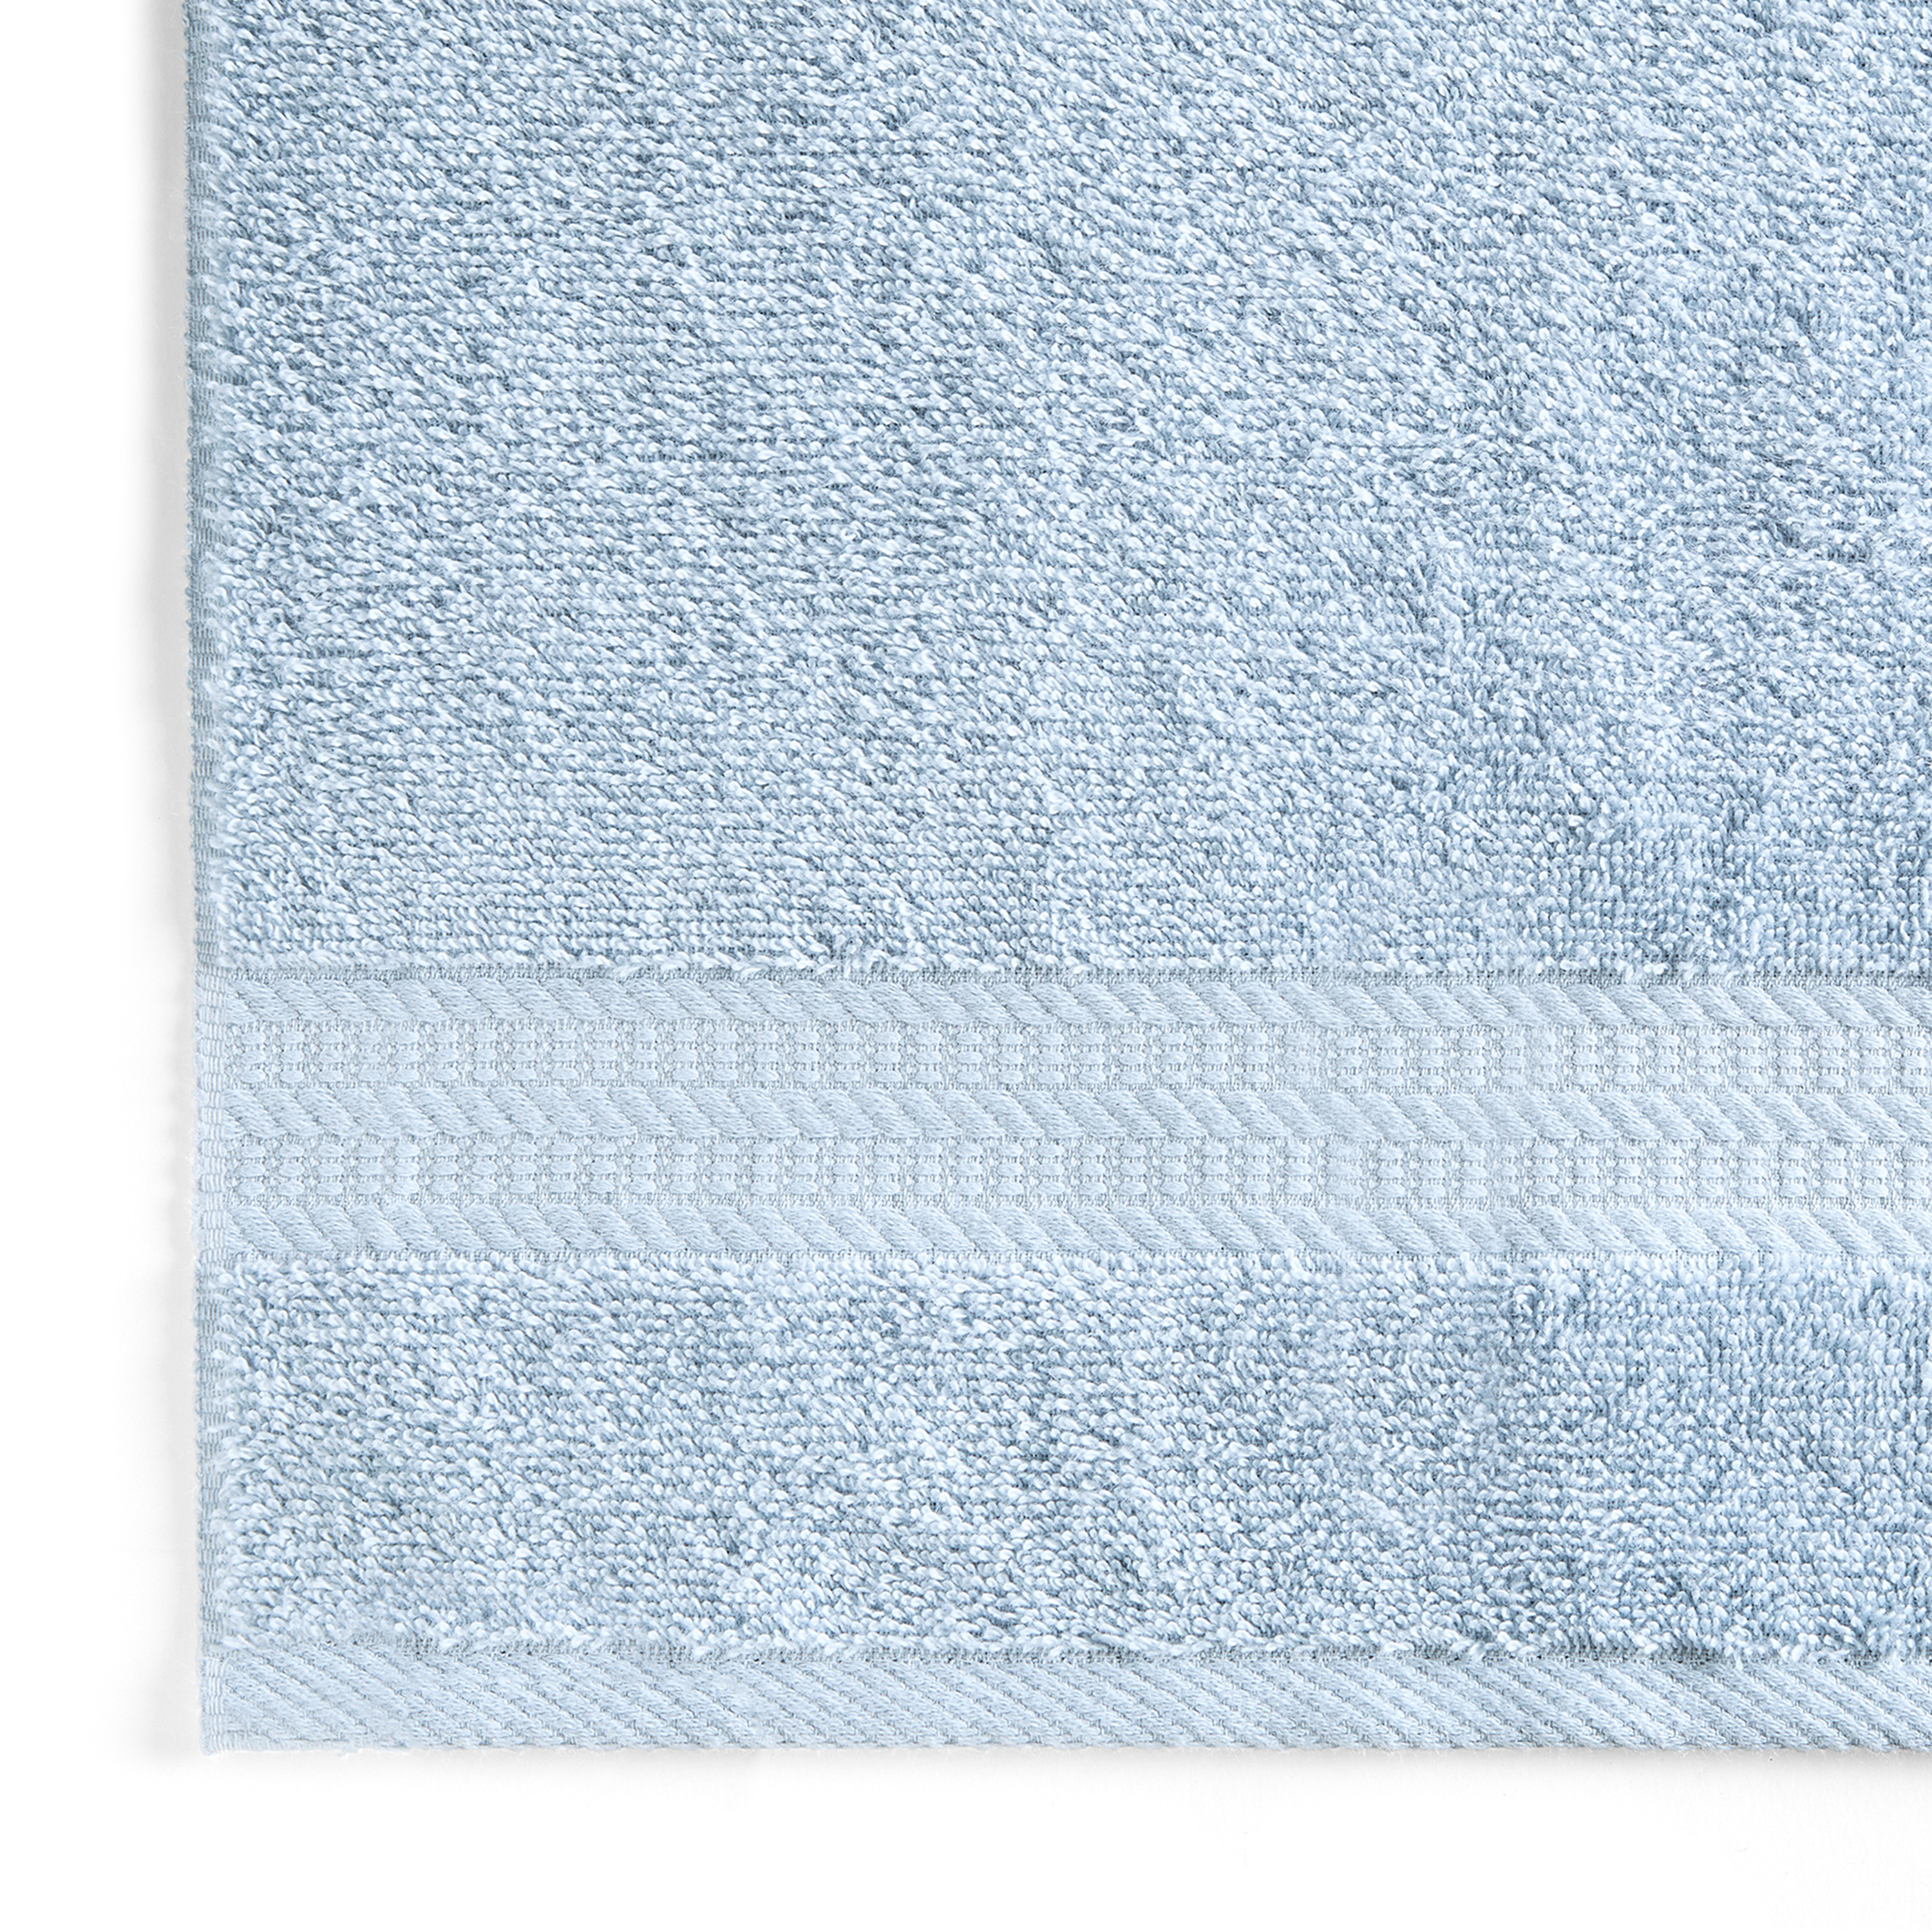 Better Homes & Gardens Hand Towel, Solid Light Blue - image 5 of 7